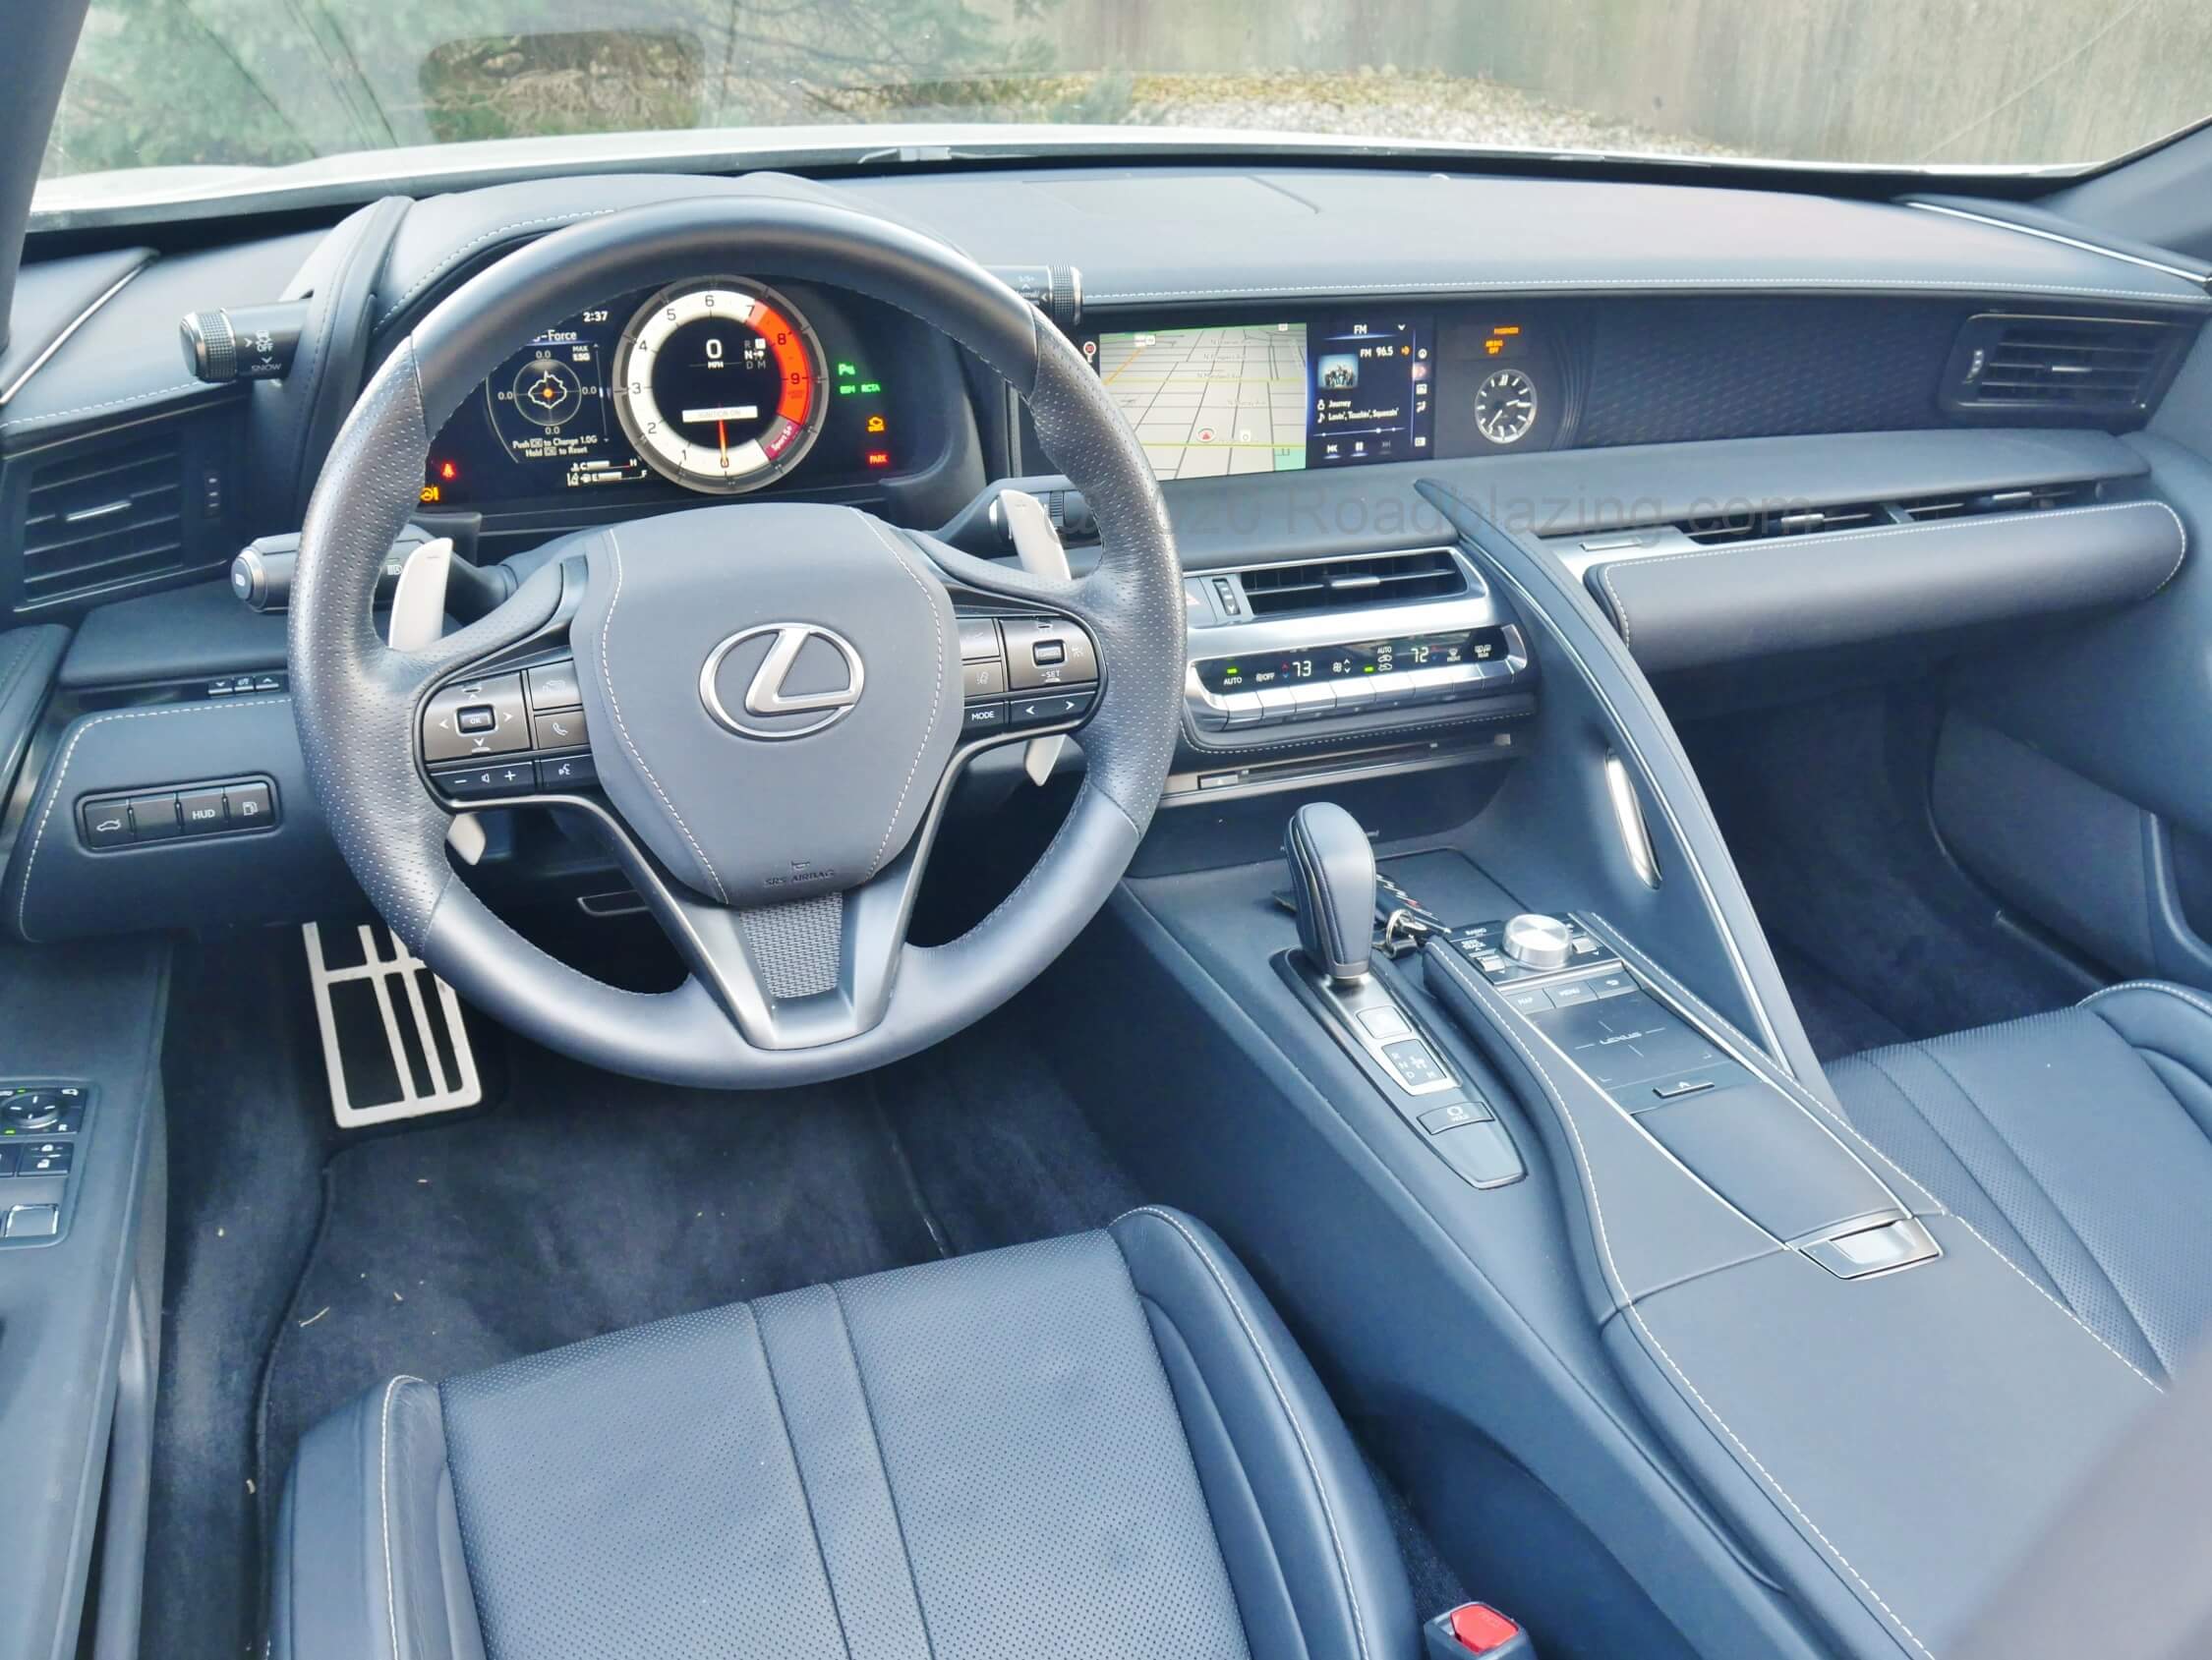 2021 Lexus LC 500 Convertible: subtle kind of bespoke cockpit with racy ELD mono-gauge, smooth cross stitched soft leathered or brushed metallic surfaces throughout